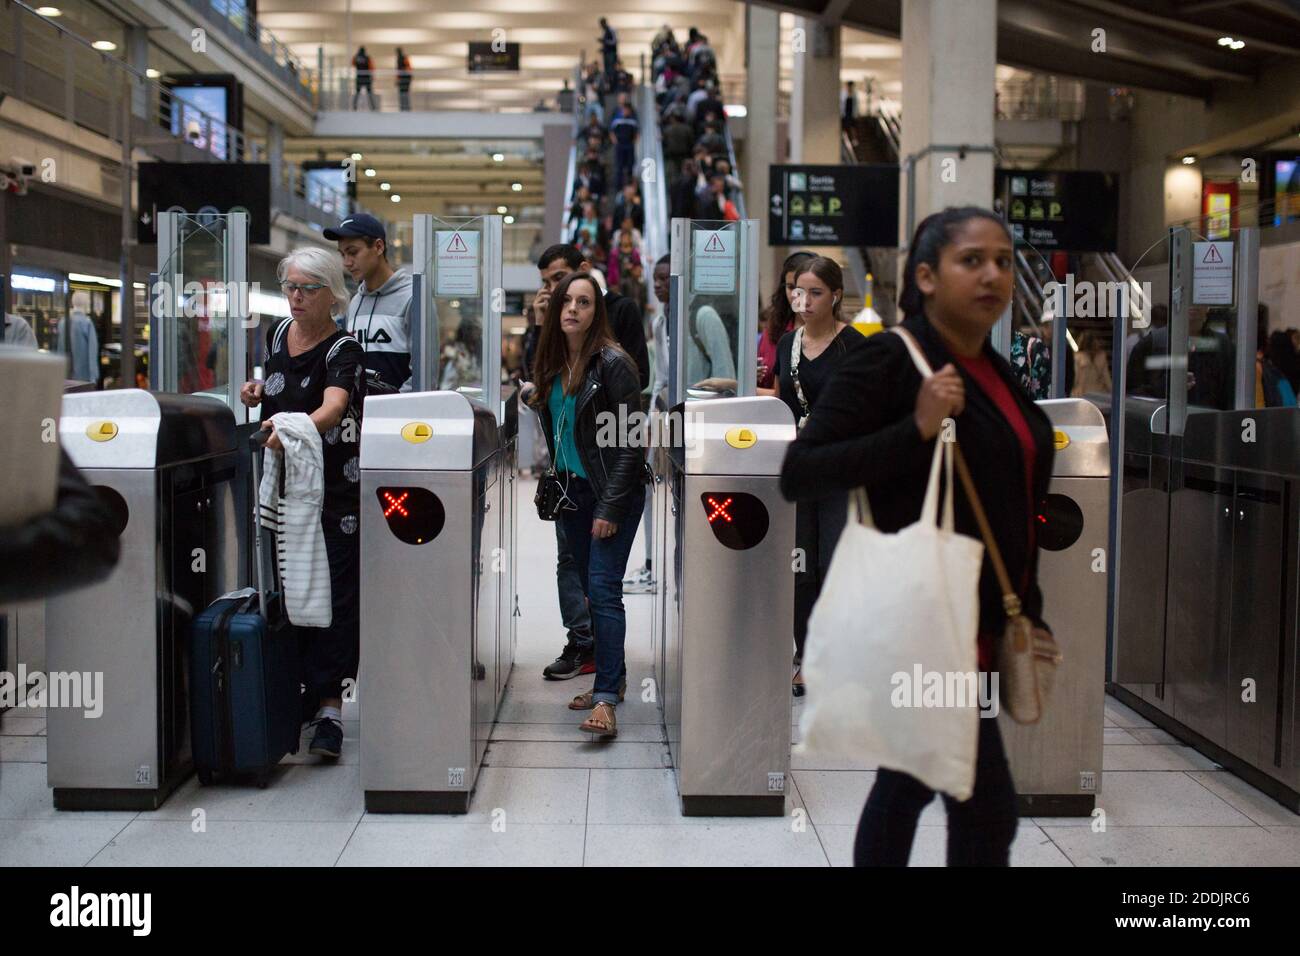 Commuters try to get a train at Gare Du Nord metro station in Paris, France on Septemebr 13, 2019. A one-day strike of Paris public transports operator RATP employees is called by unions over French government's plan to overhaul the country's retirement system. Ten of the city's 16 metro lines were shut down completely, while service on most others was "extremely disrupted," the RATP transit operator said. The city's burgeoning cycle lane system was seeing a surge in traffic as people pulled out bikes to get to work. Photo by Rafael Lafargue/ABACAPRESS.COM Stock Photo